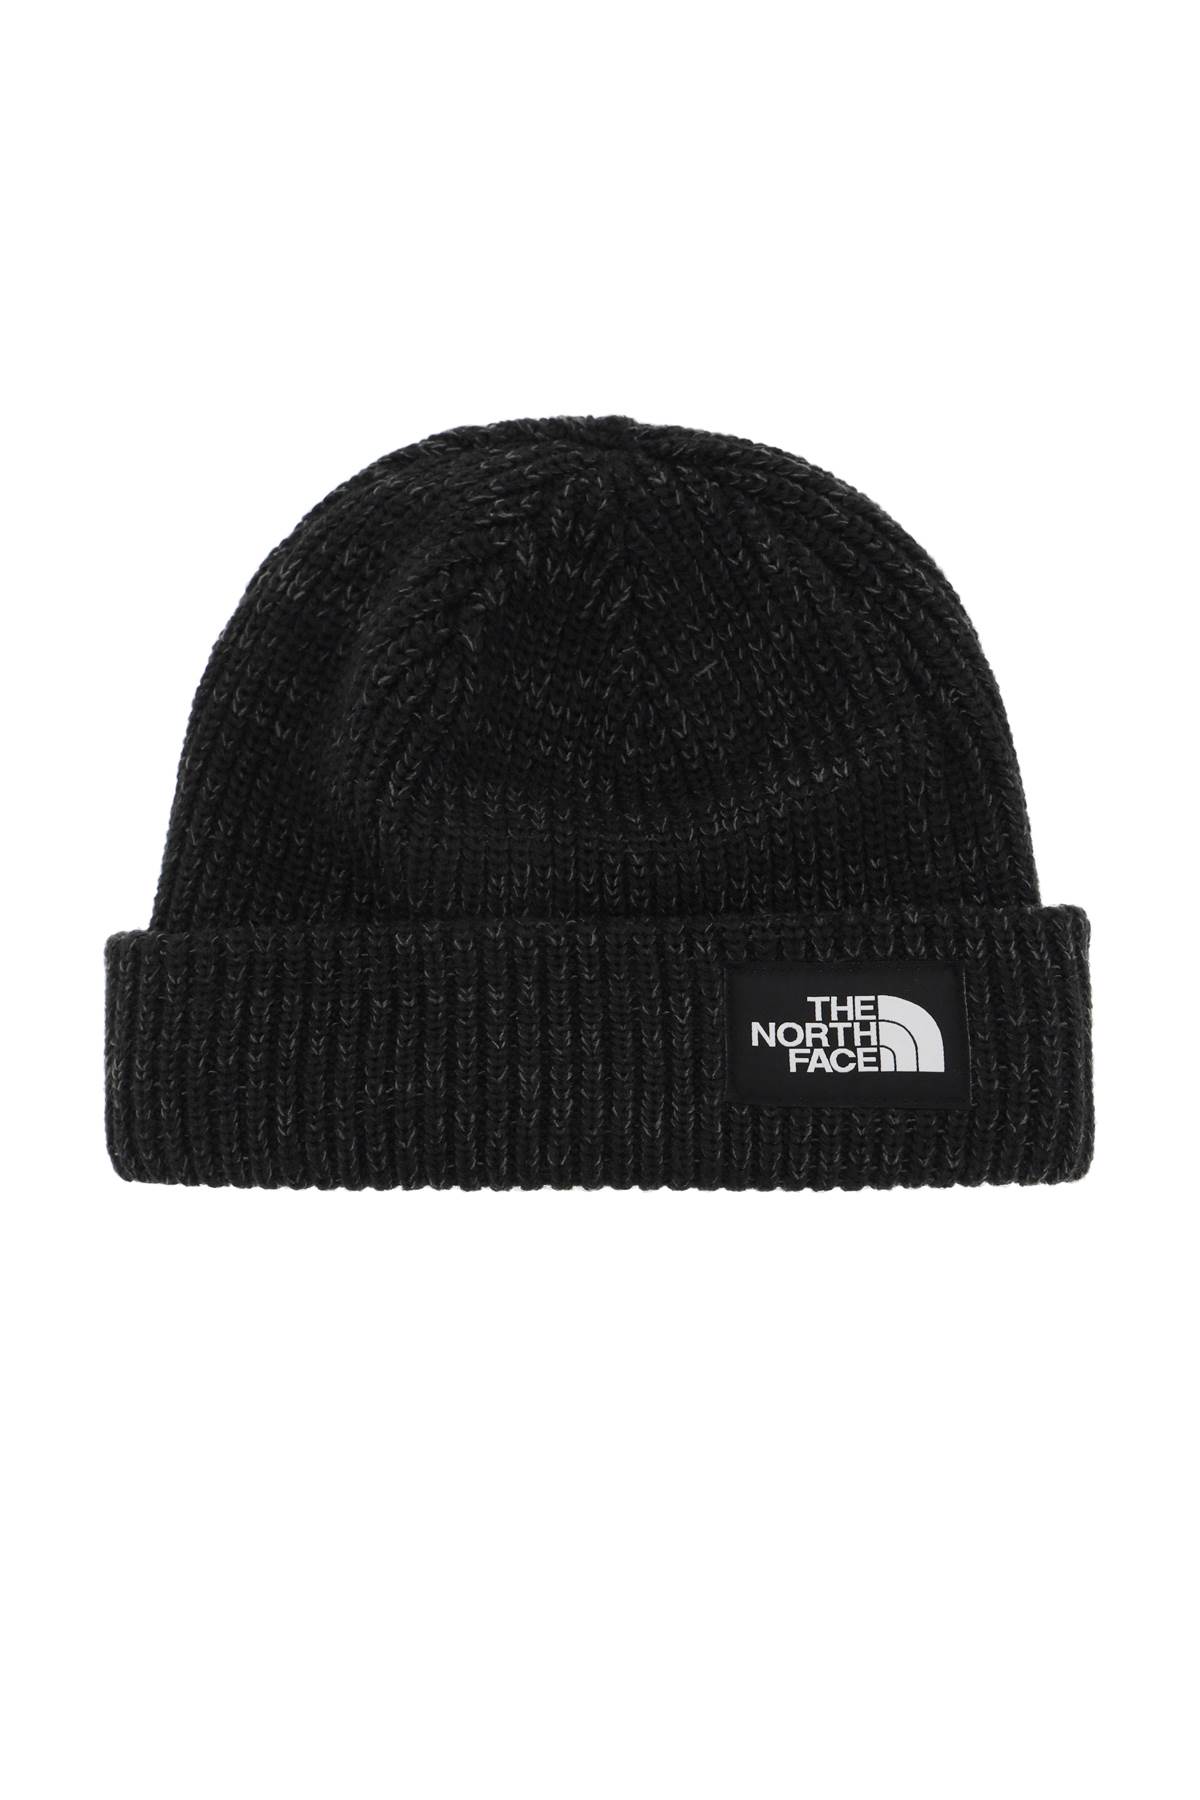 The North Face Salty Dog Beanie Hat In Tnf Black (black)